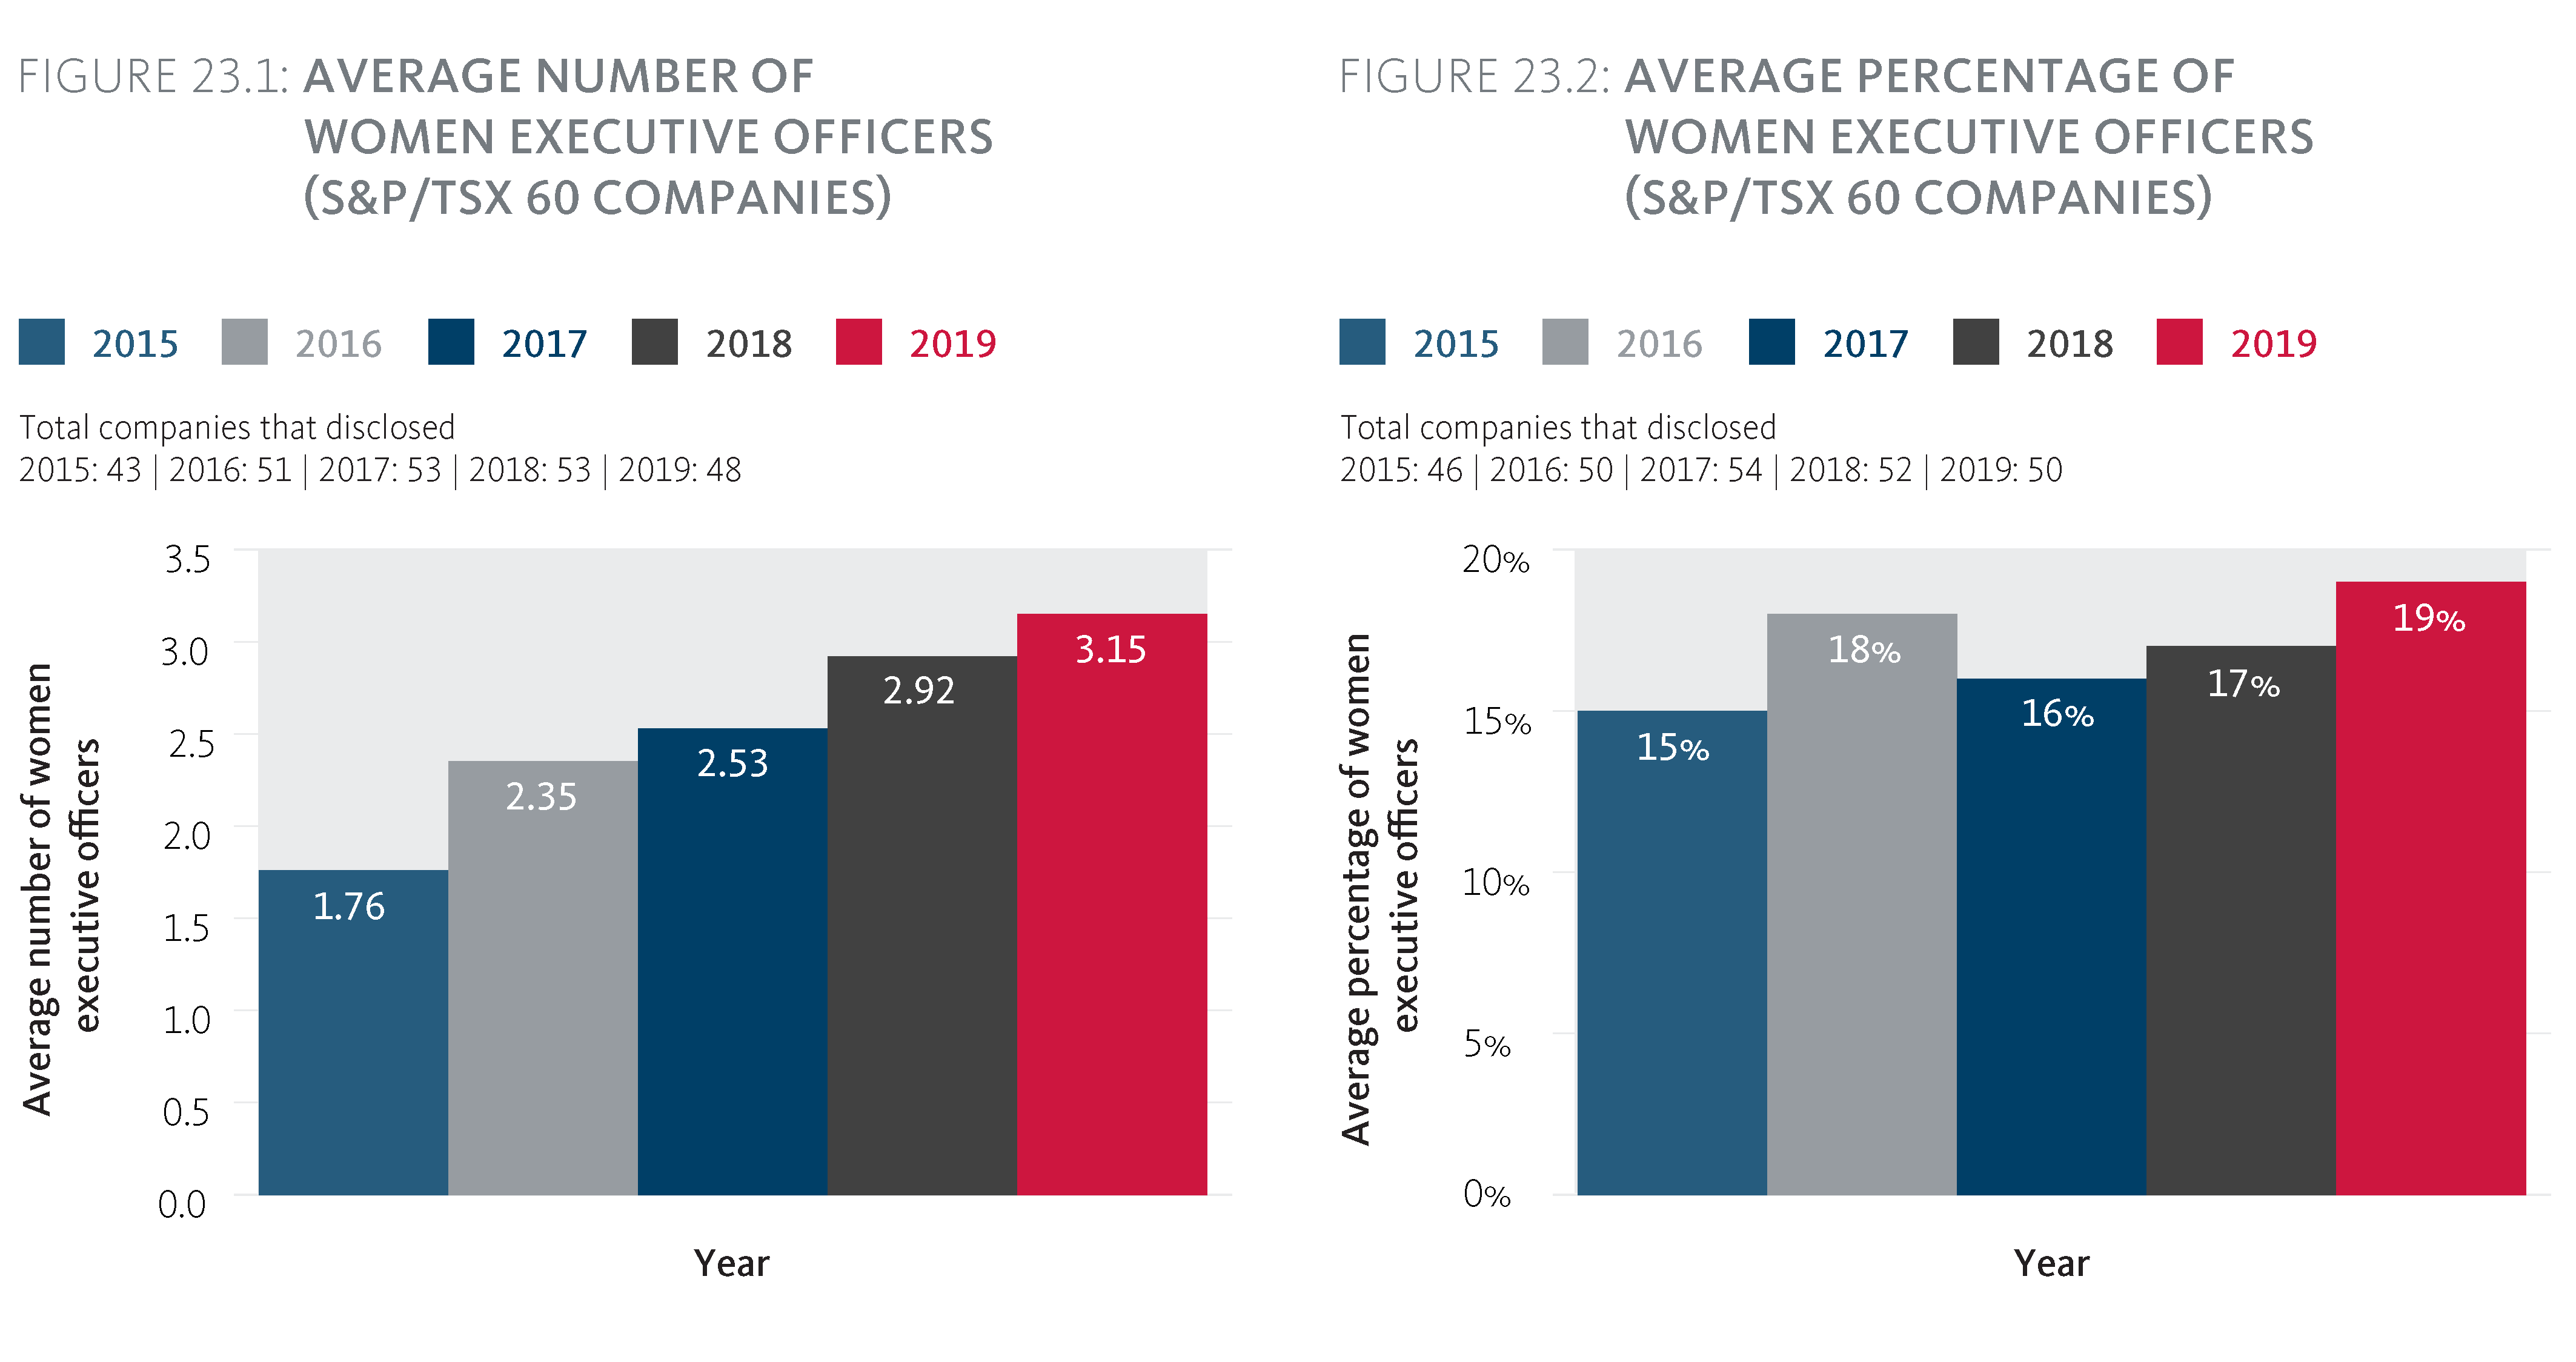 Average number and percentage of women Executive Officers (S&P/TSX 60 companies)